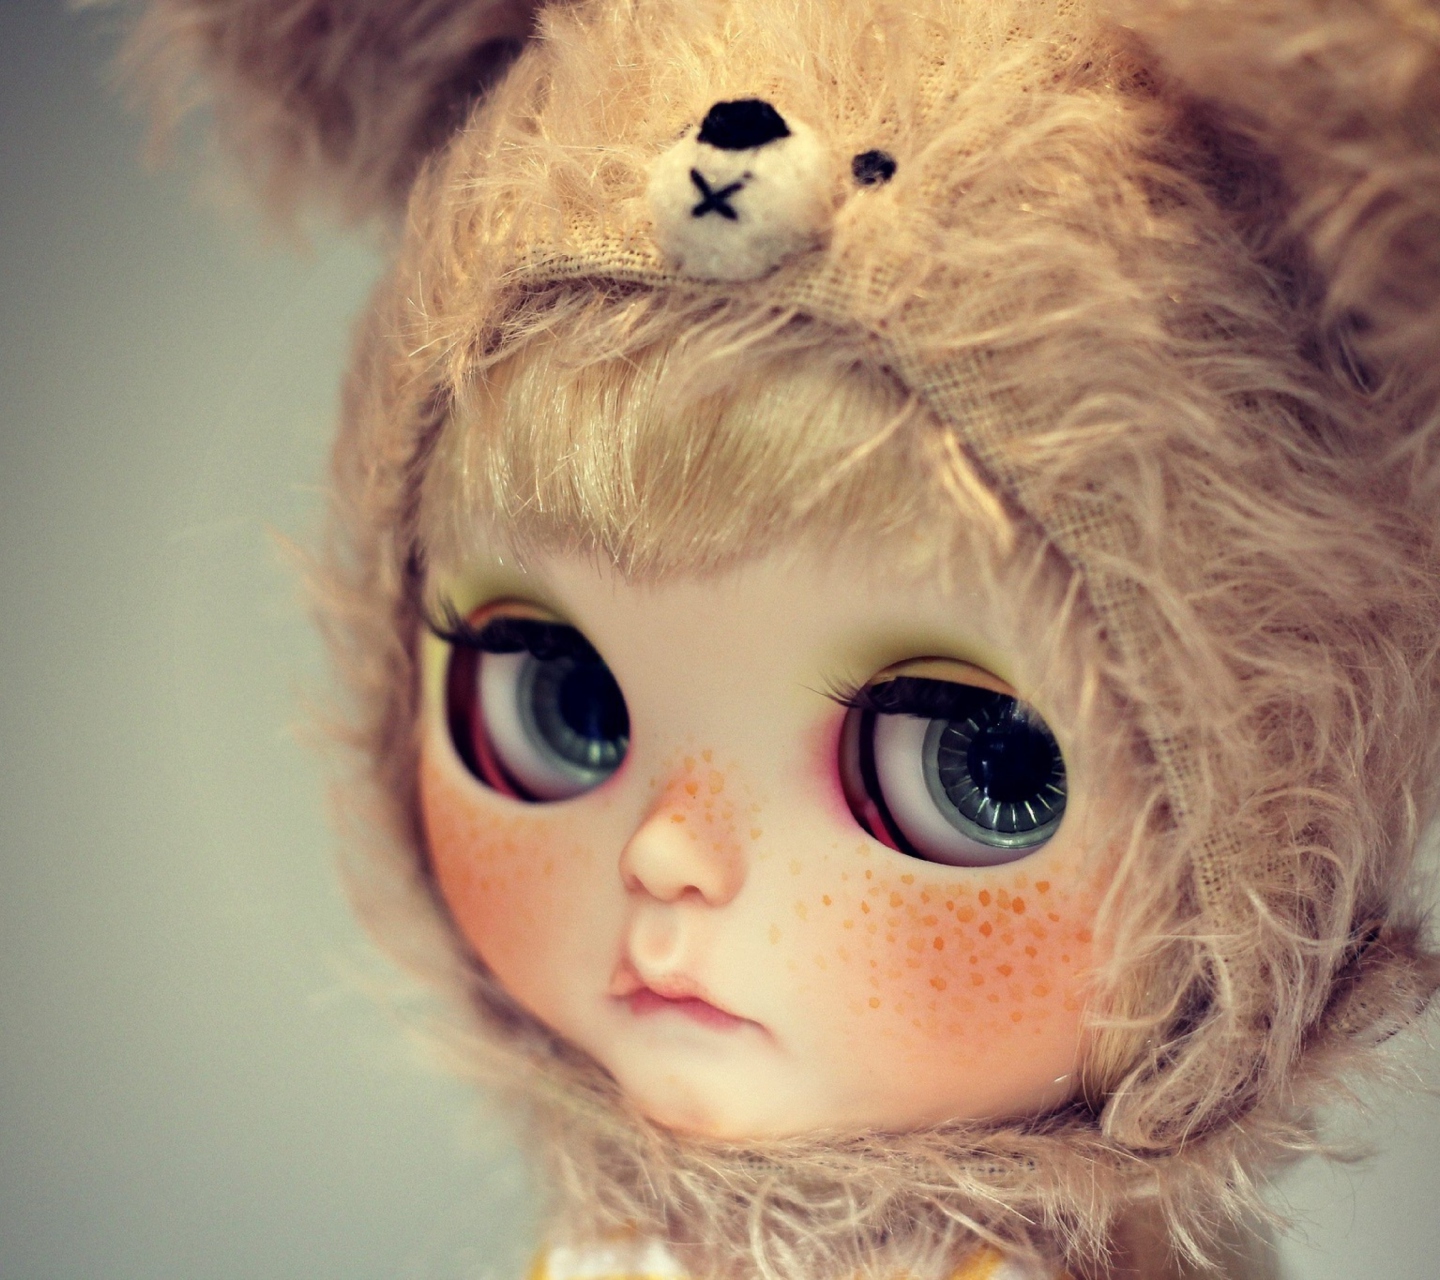 Cute Doll With Freckles screenshot #1 1440x1280